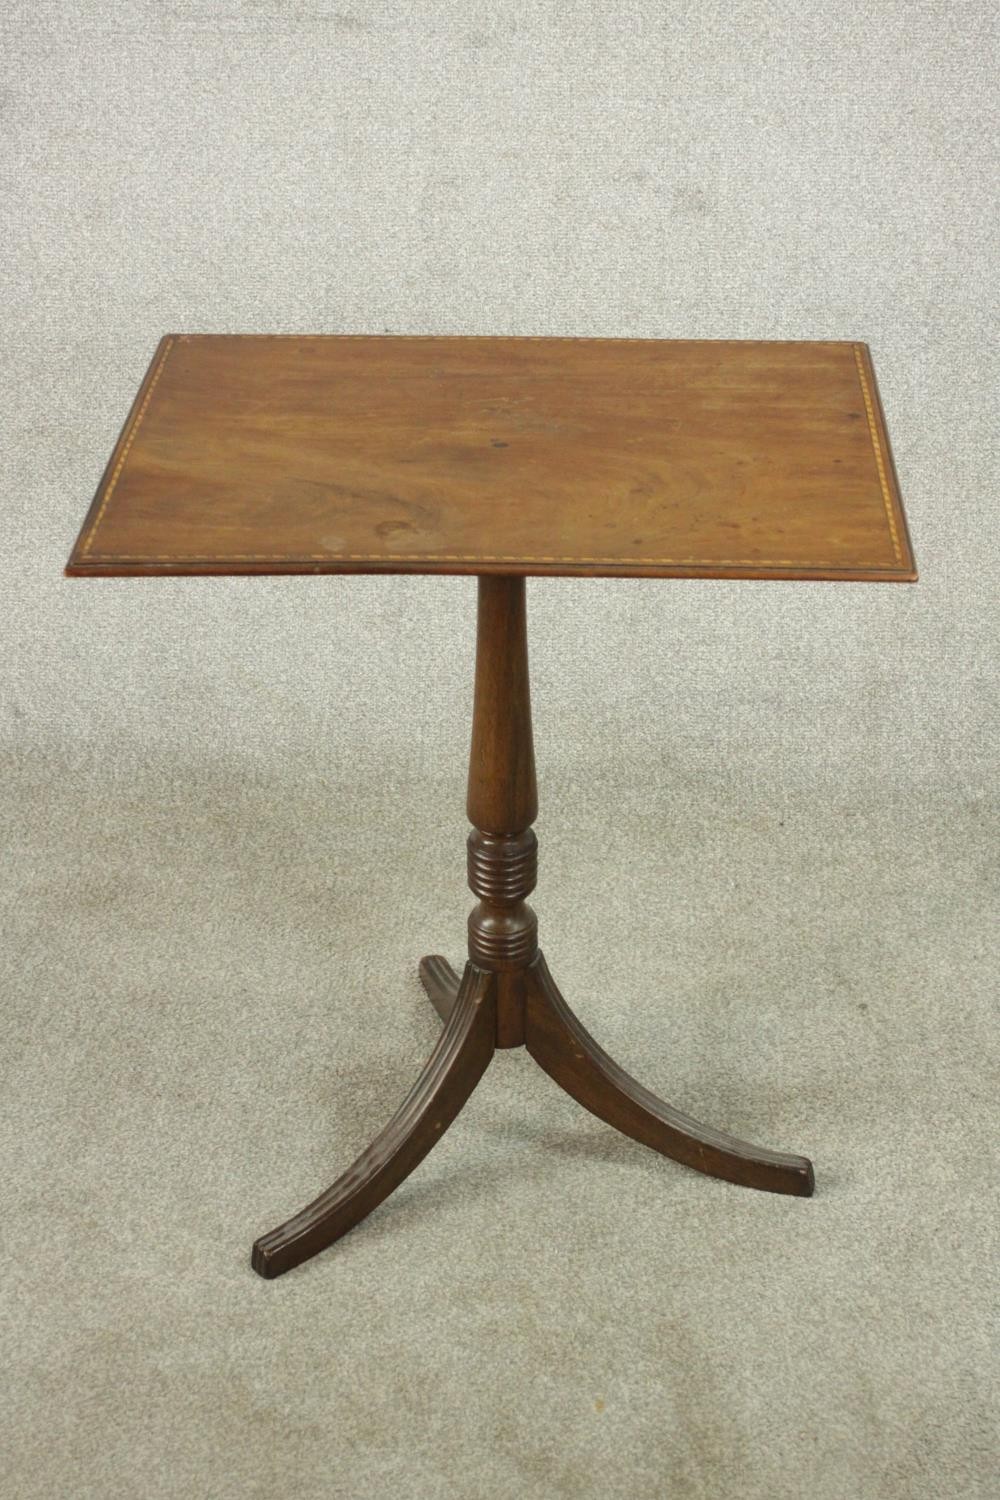 A 19th century walnut occasional table, the rectangular top with inlaid border, on a turned stem